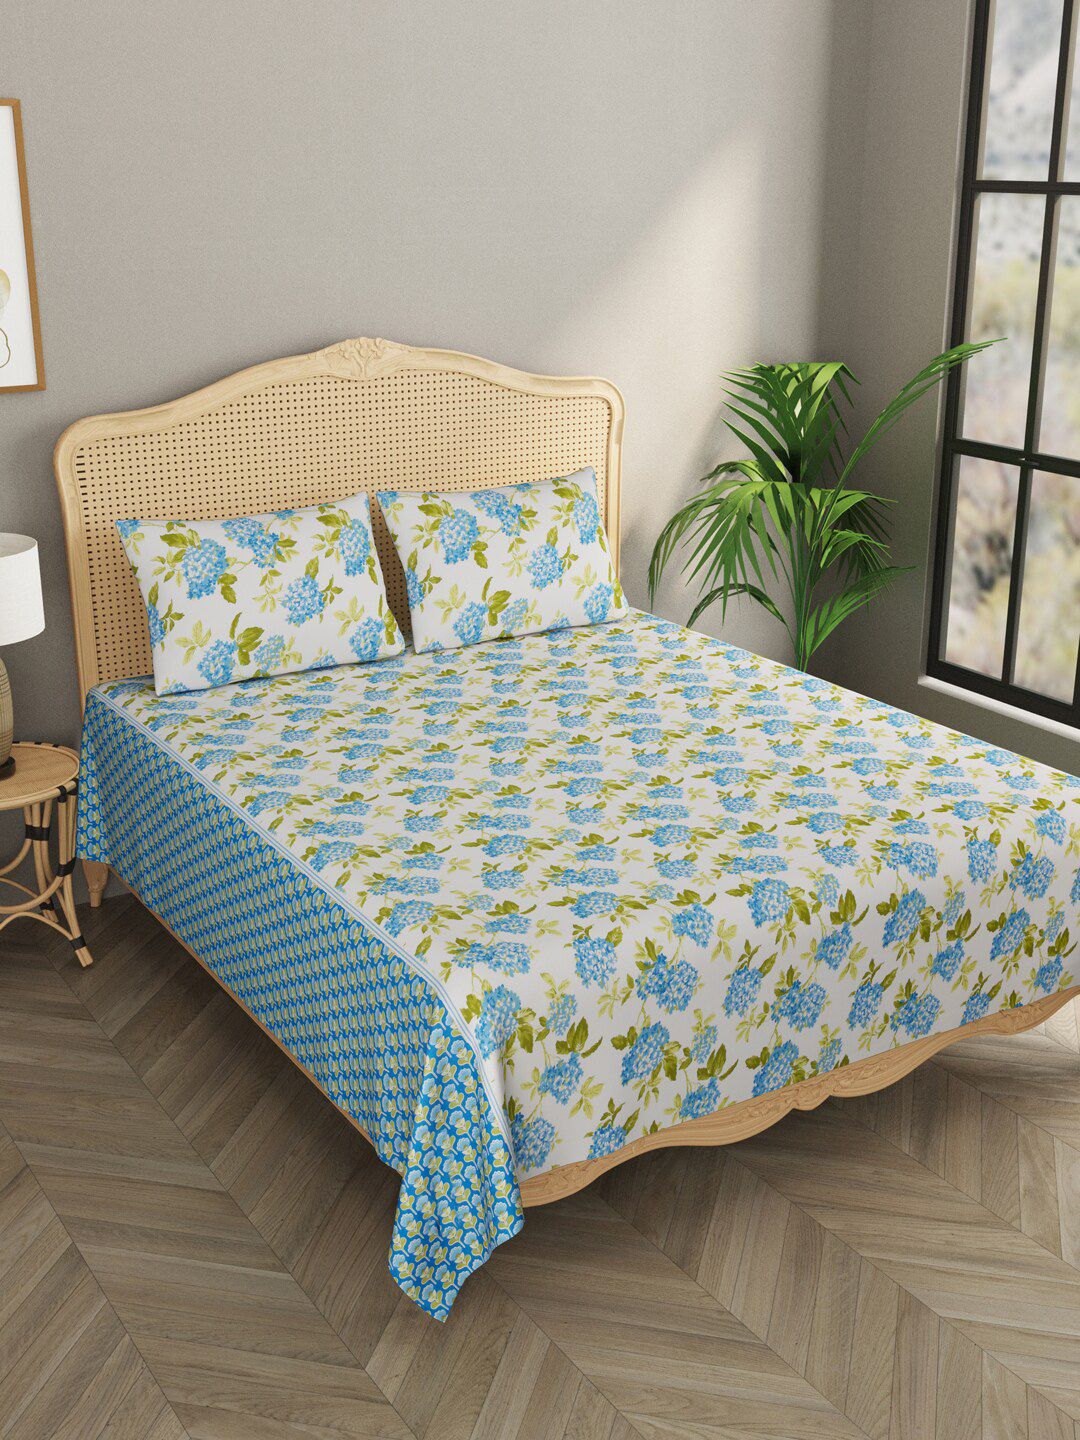 Gulaab Jaipur Blue & Green Floral 600 TC King Bedsheet with 2 Pillow Covers Price in India